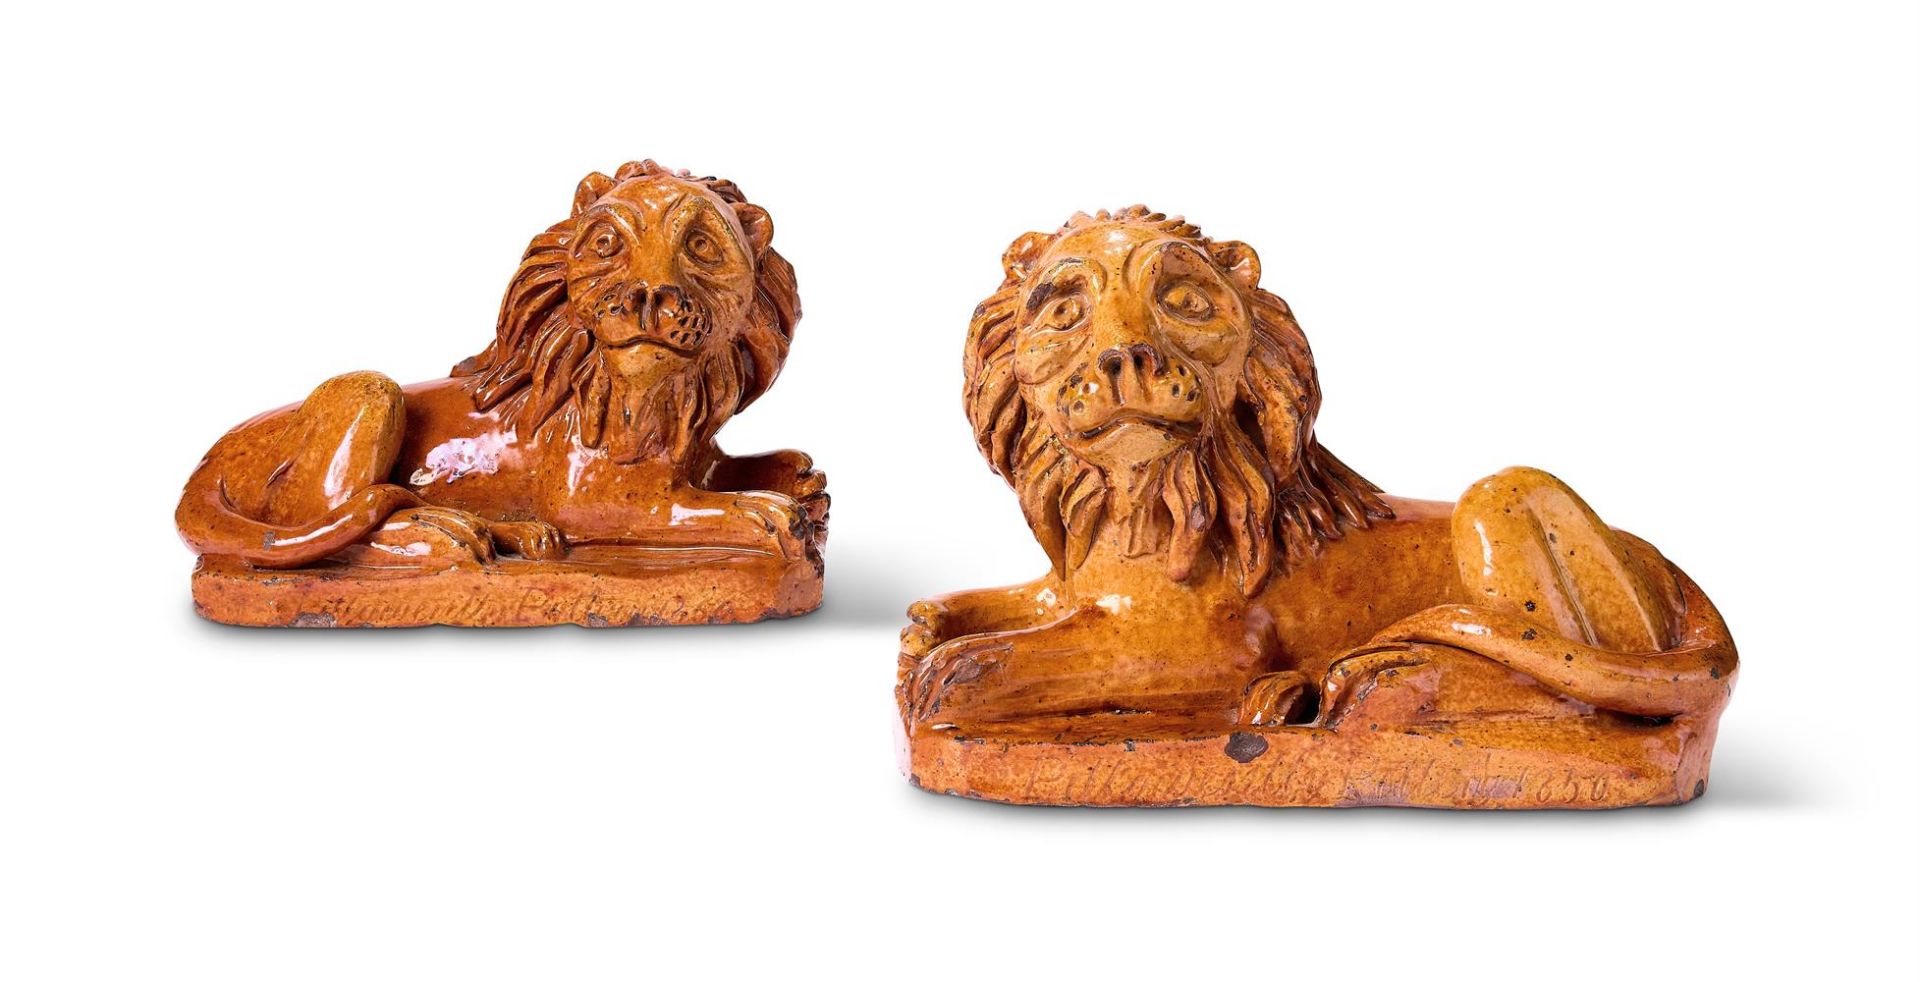 A MATCHED PAIR OF PILL POTTERY (NEWPORT MONMOUTHSHIRE) TREACLE-GLAZED RED POTTERY RECUMBENT LIONS